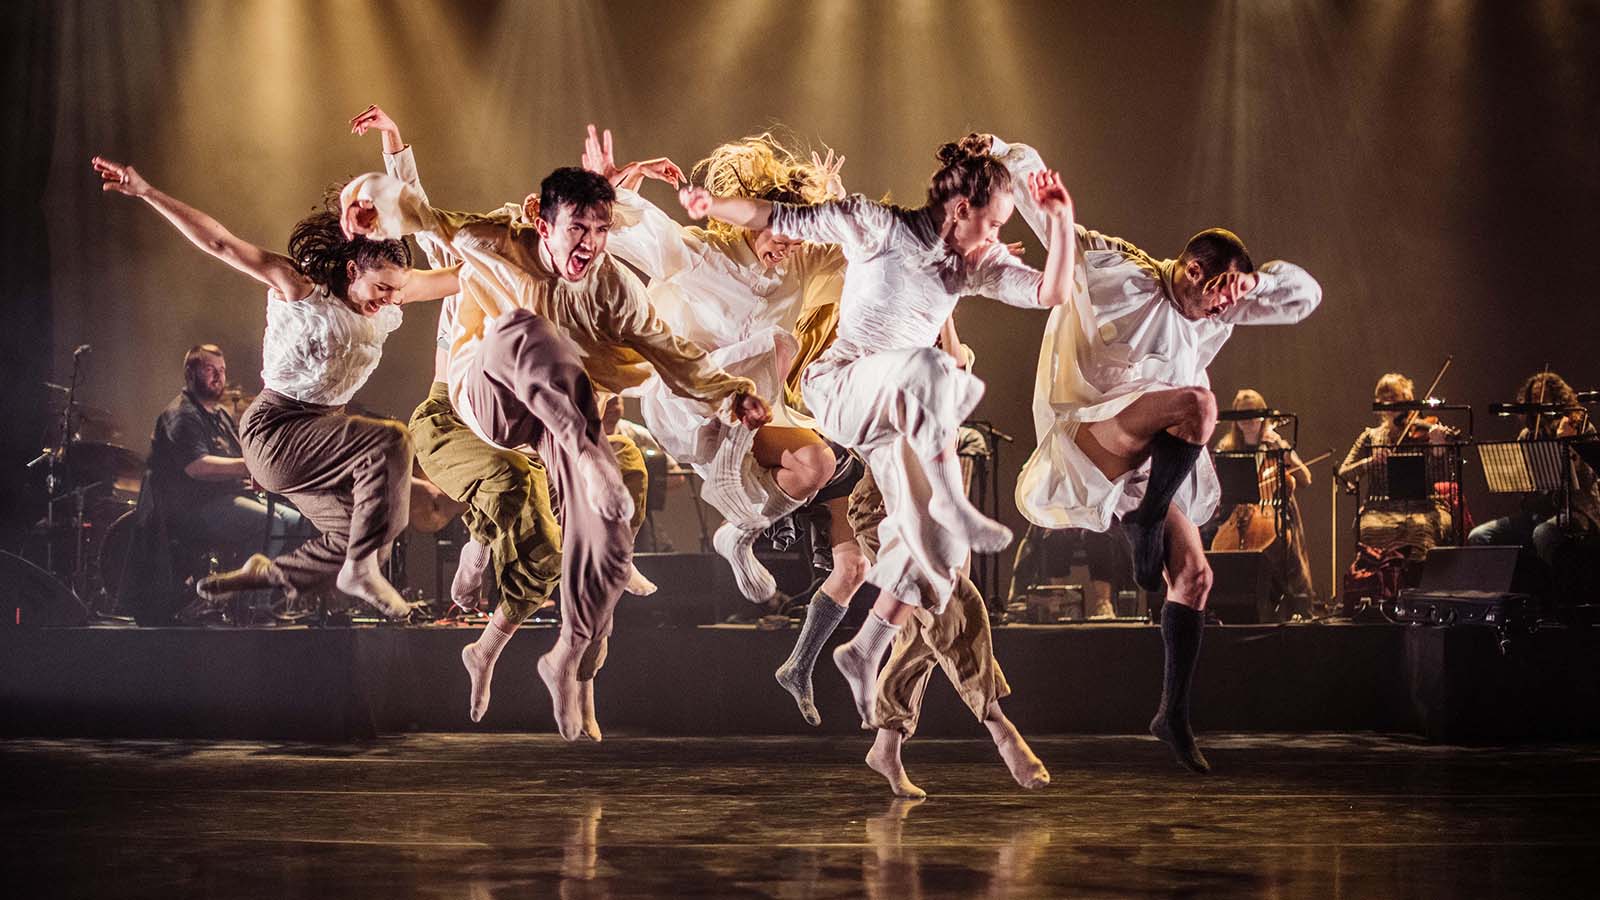 A group of dancers leaping in the air during a performance. Behind them is a live orchestra.